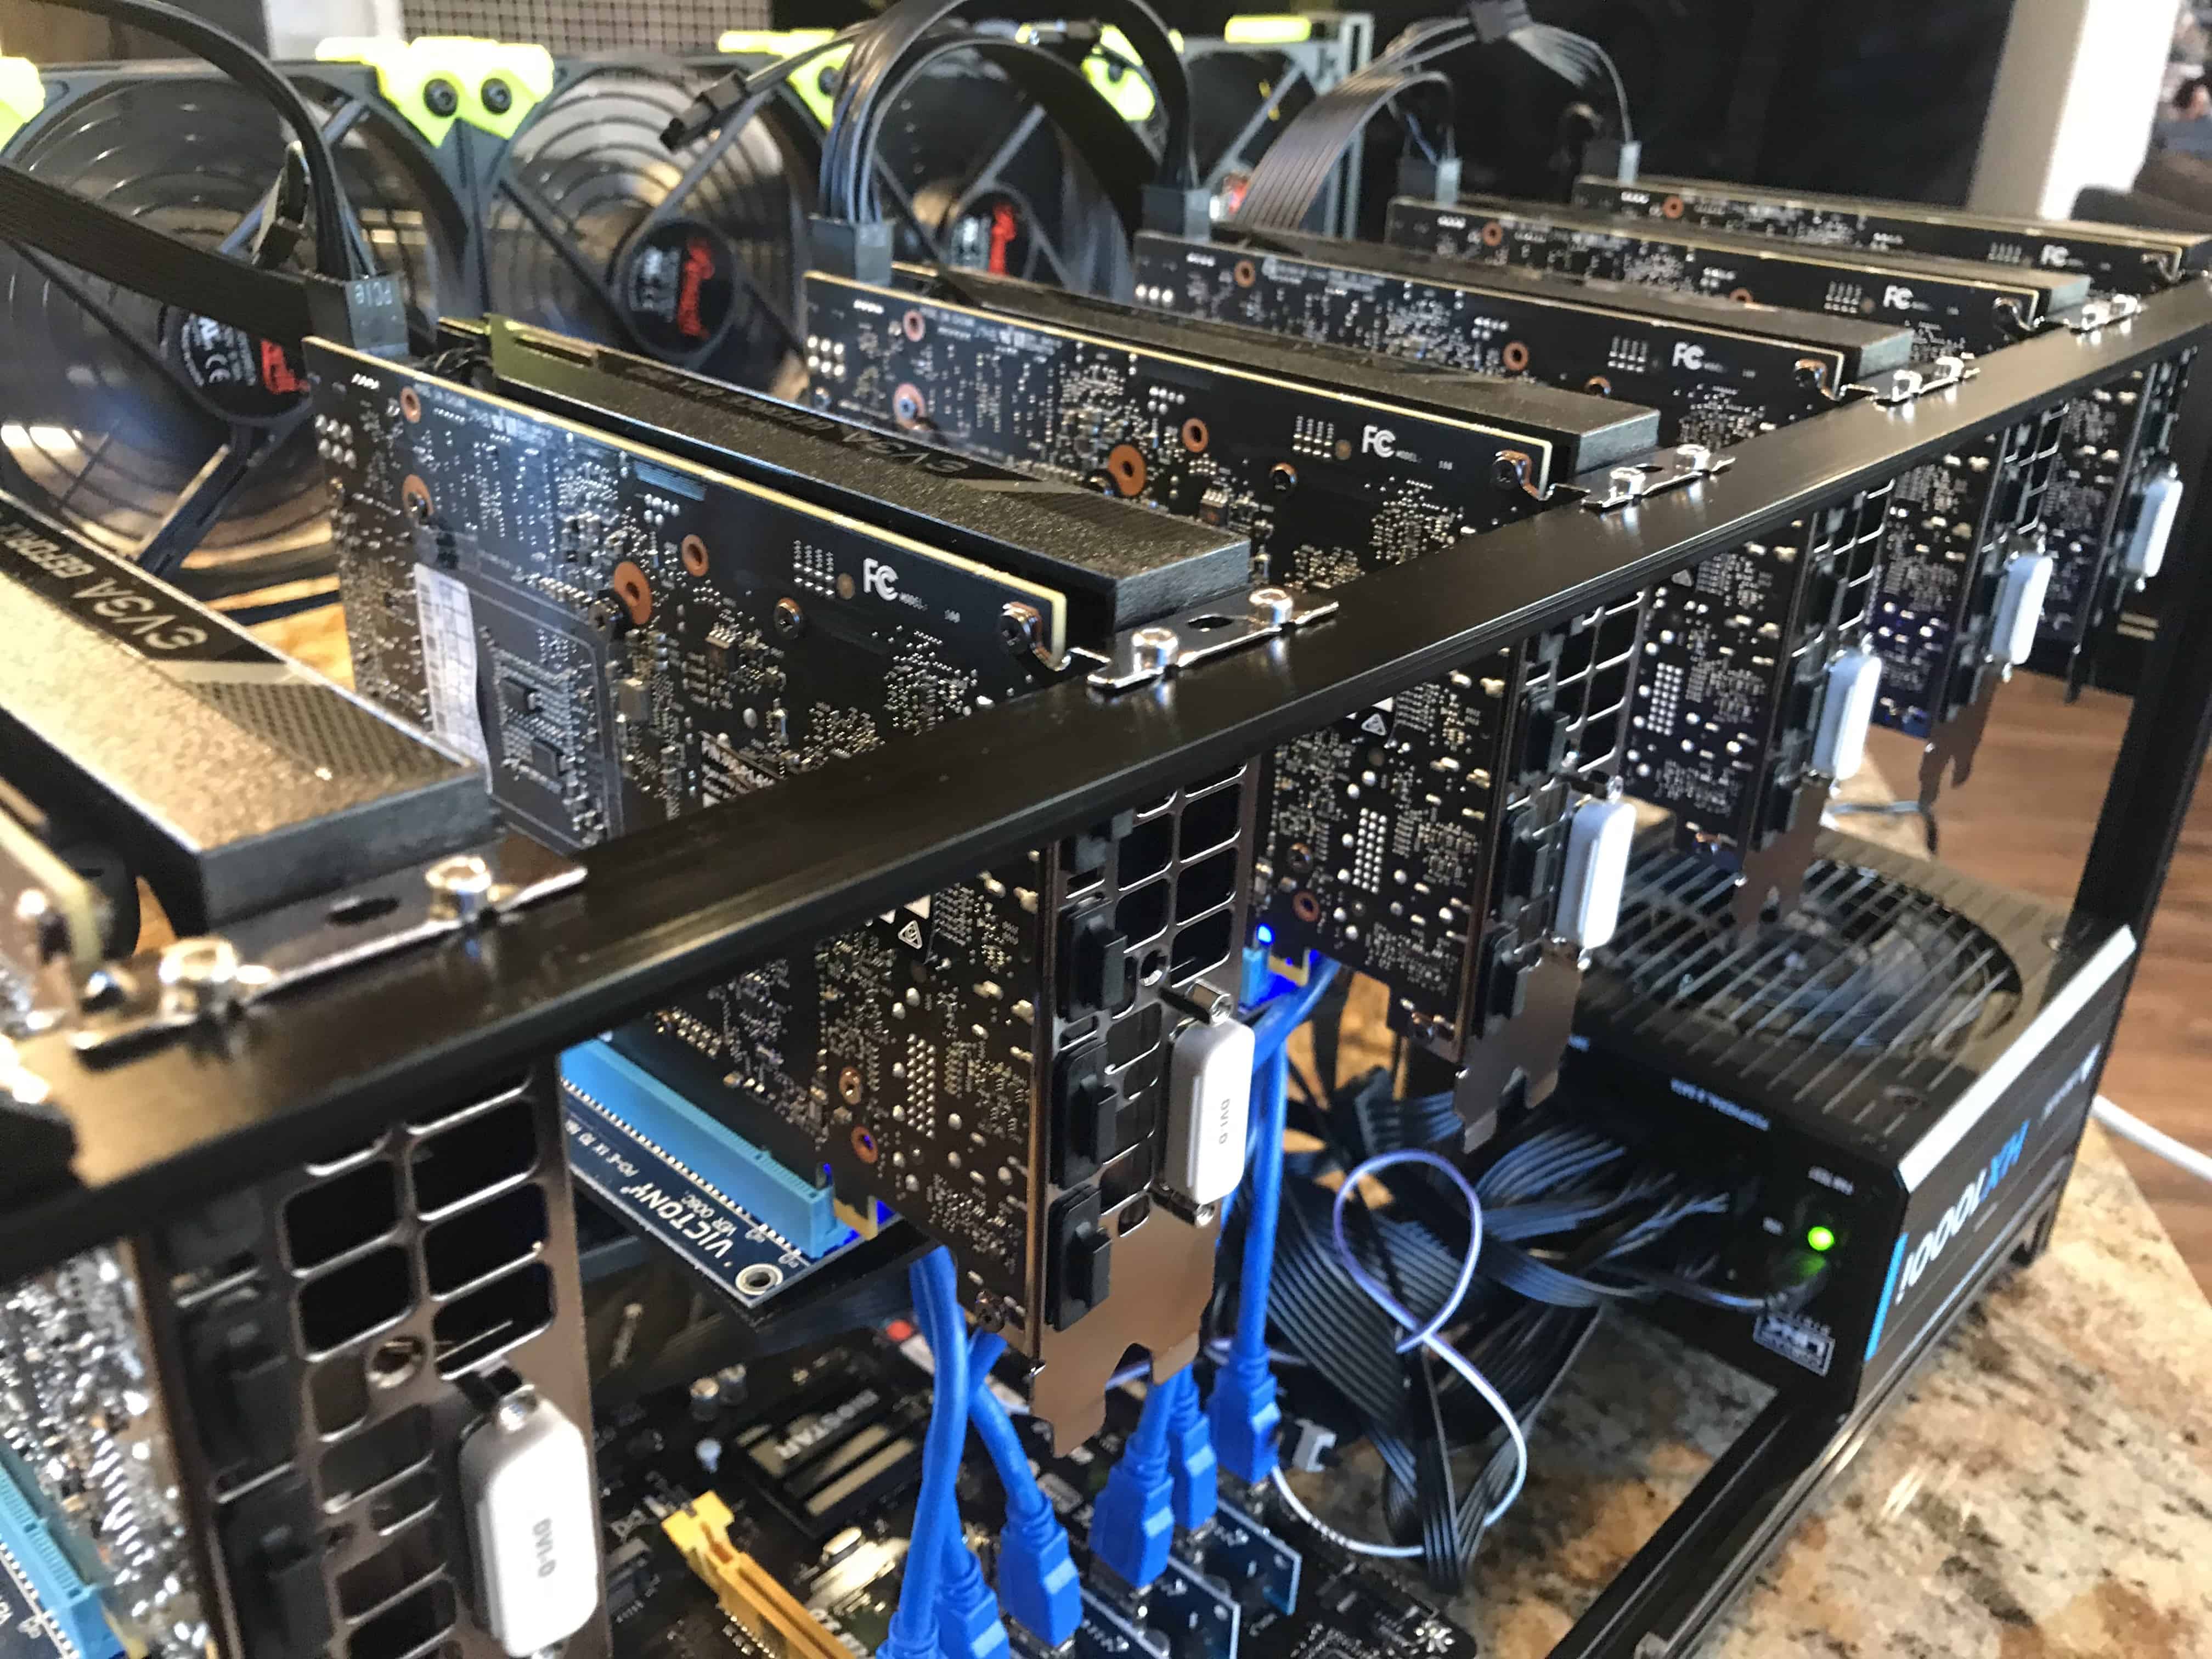 This startup is trying to make bitcoin mining more accessible for everyone